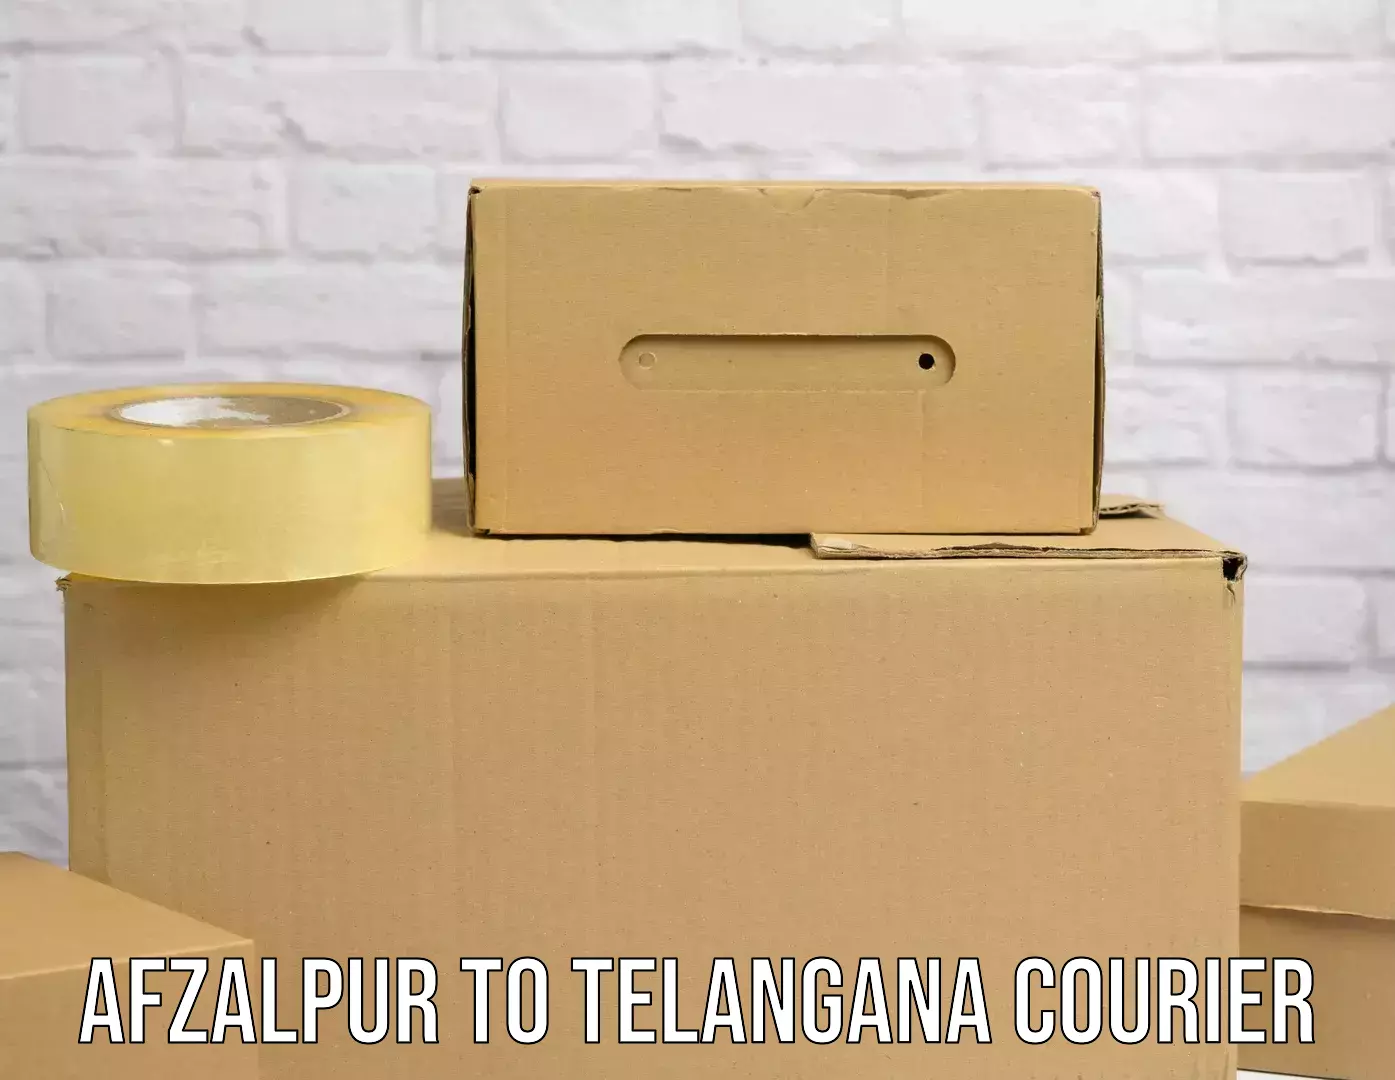 State-of-the-art courier technology Afzalpur to Telangana